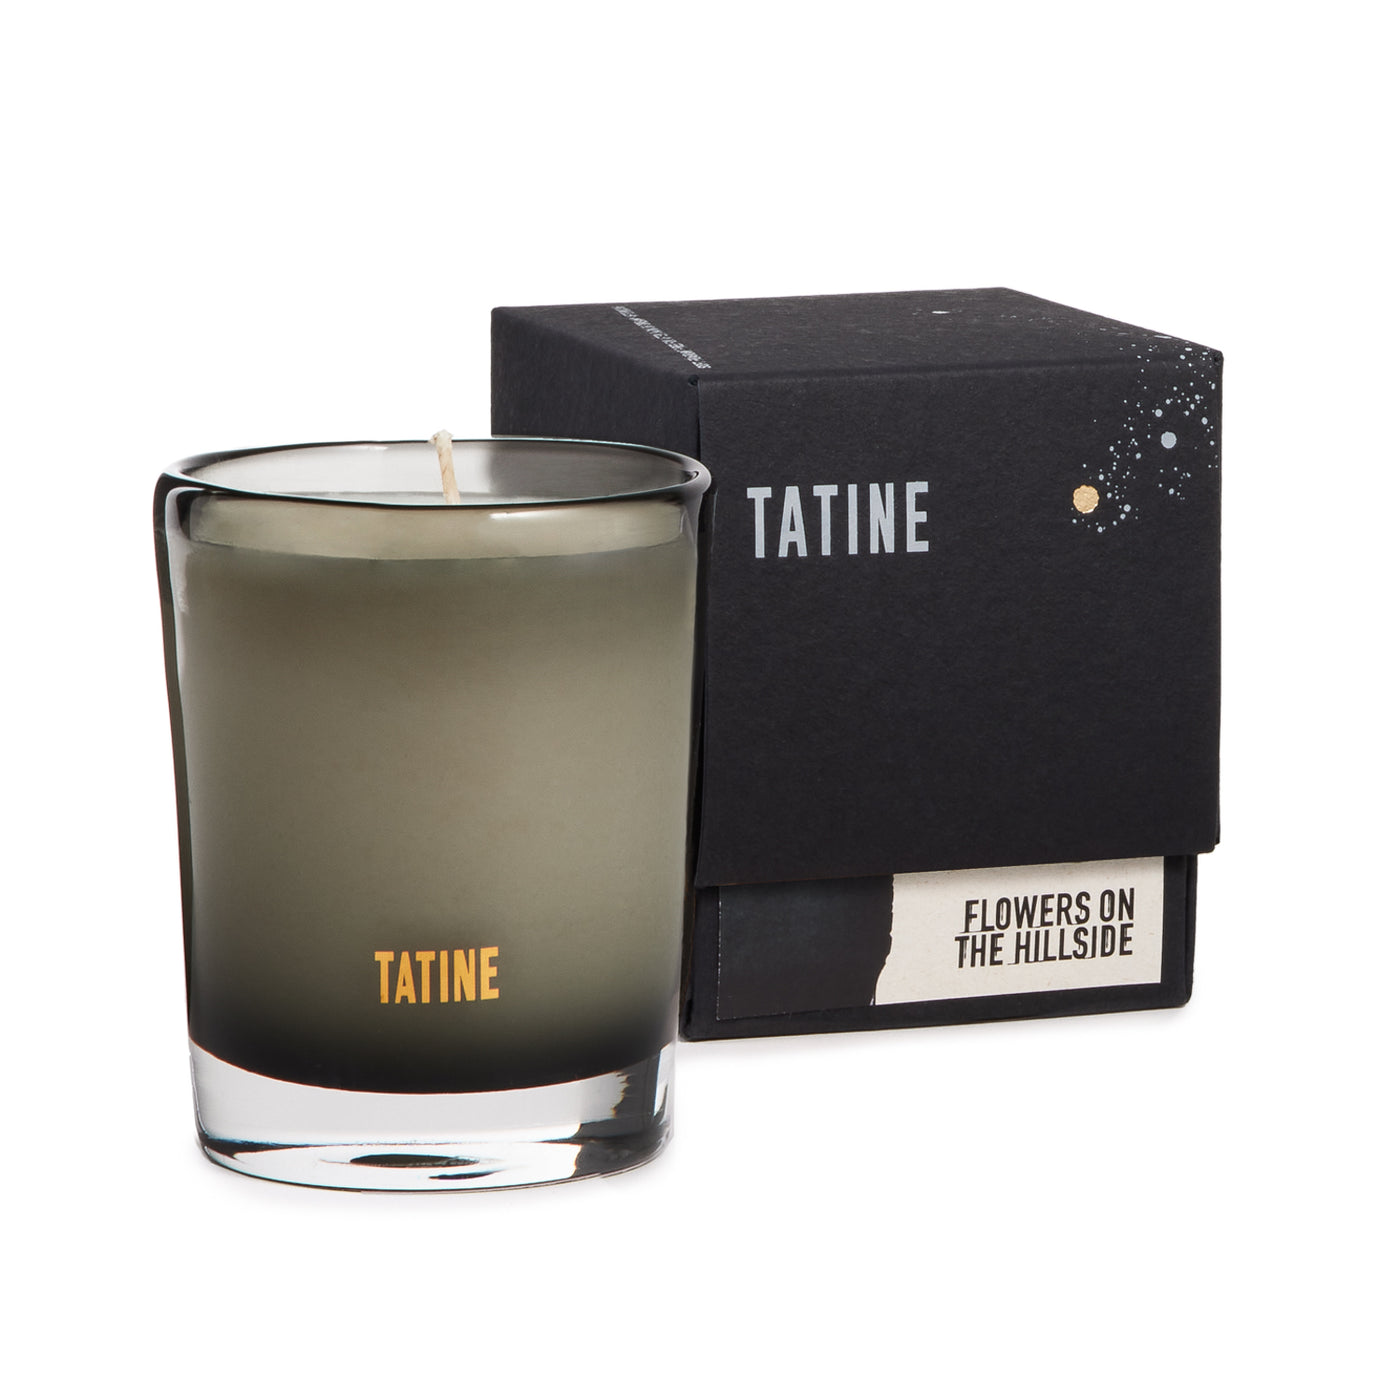 Flowers on the Hillside Tatine Candle